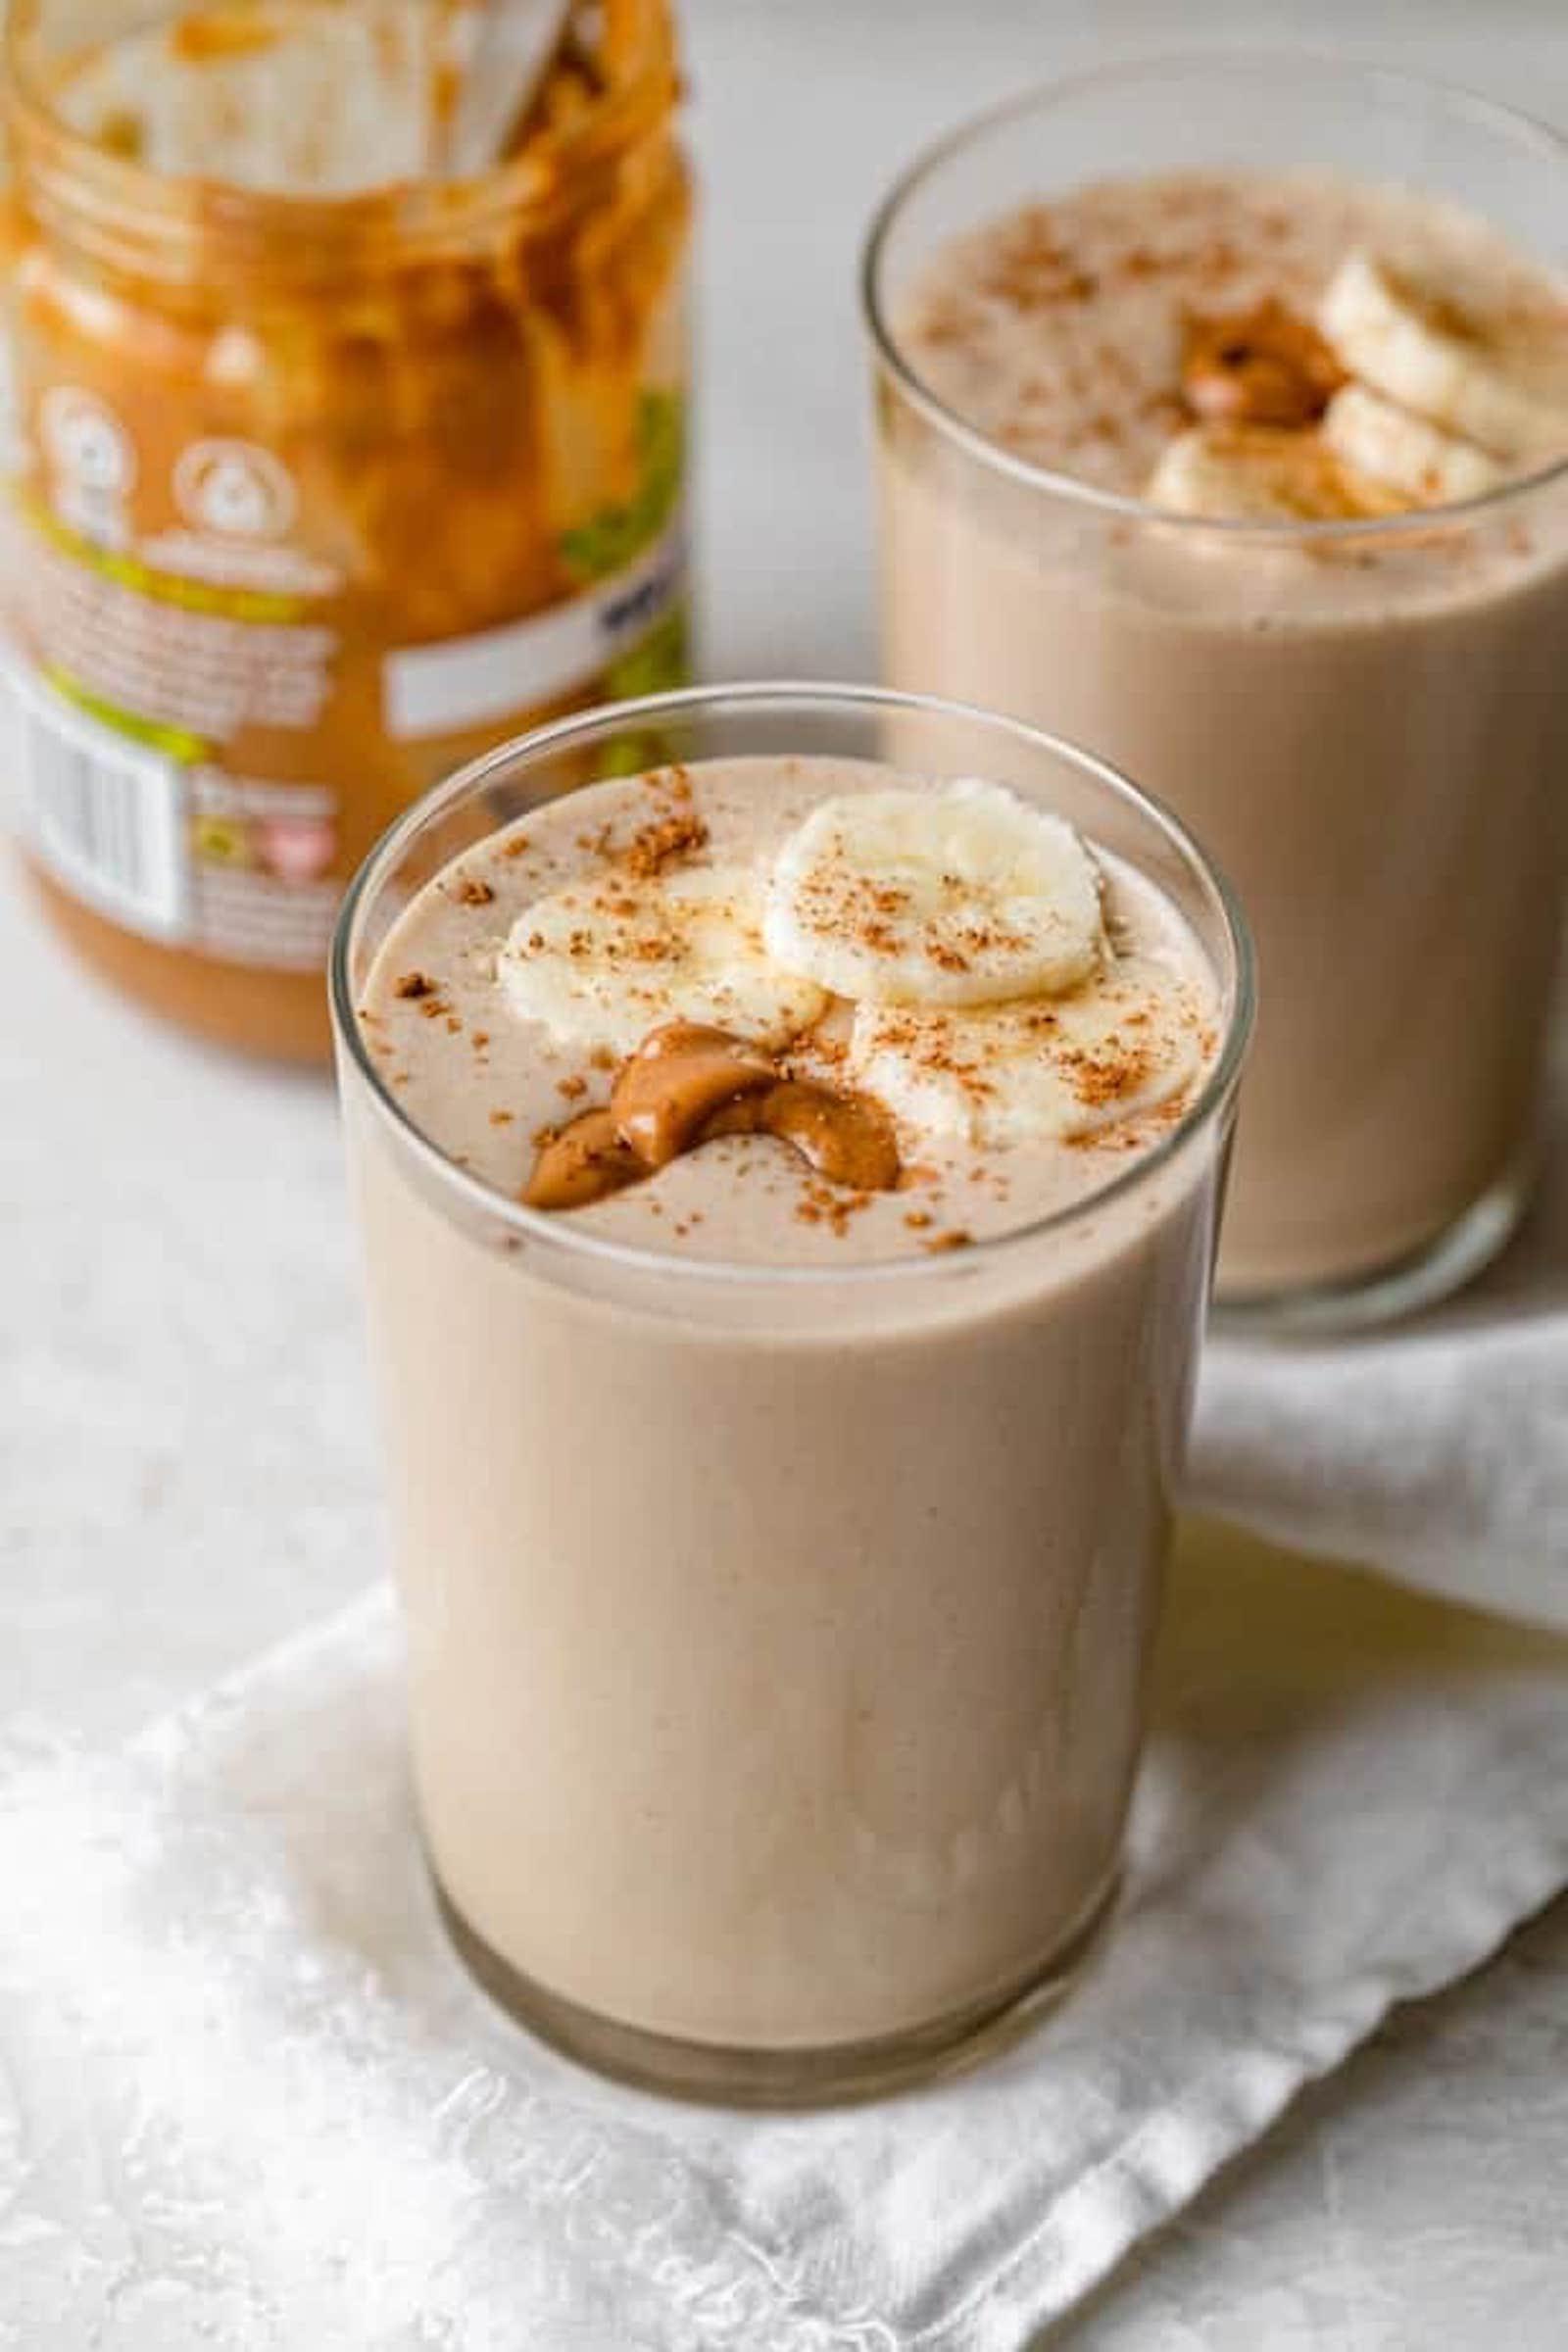 For lunch on the go, blend up bananas, Greek yogurt, oats, almond milk, and peanut butter. You can change up the ratios depending on whether you want it thicker (more PB) or thinner (more milk), and voilà! (via <strong><a href="https://feelgoodfoodie.net/recipe/easy-peanut-butter-banana-smoothie/">Feel Good Foodie</a></strong>)